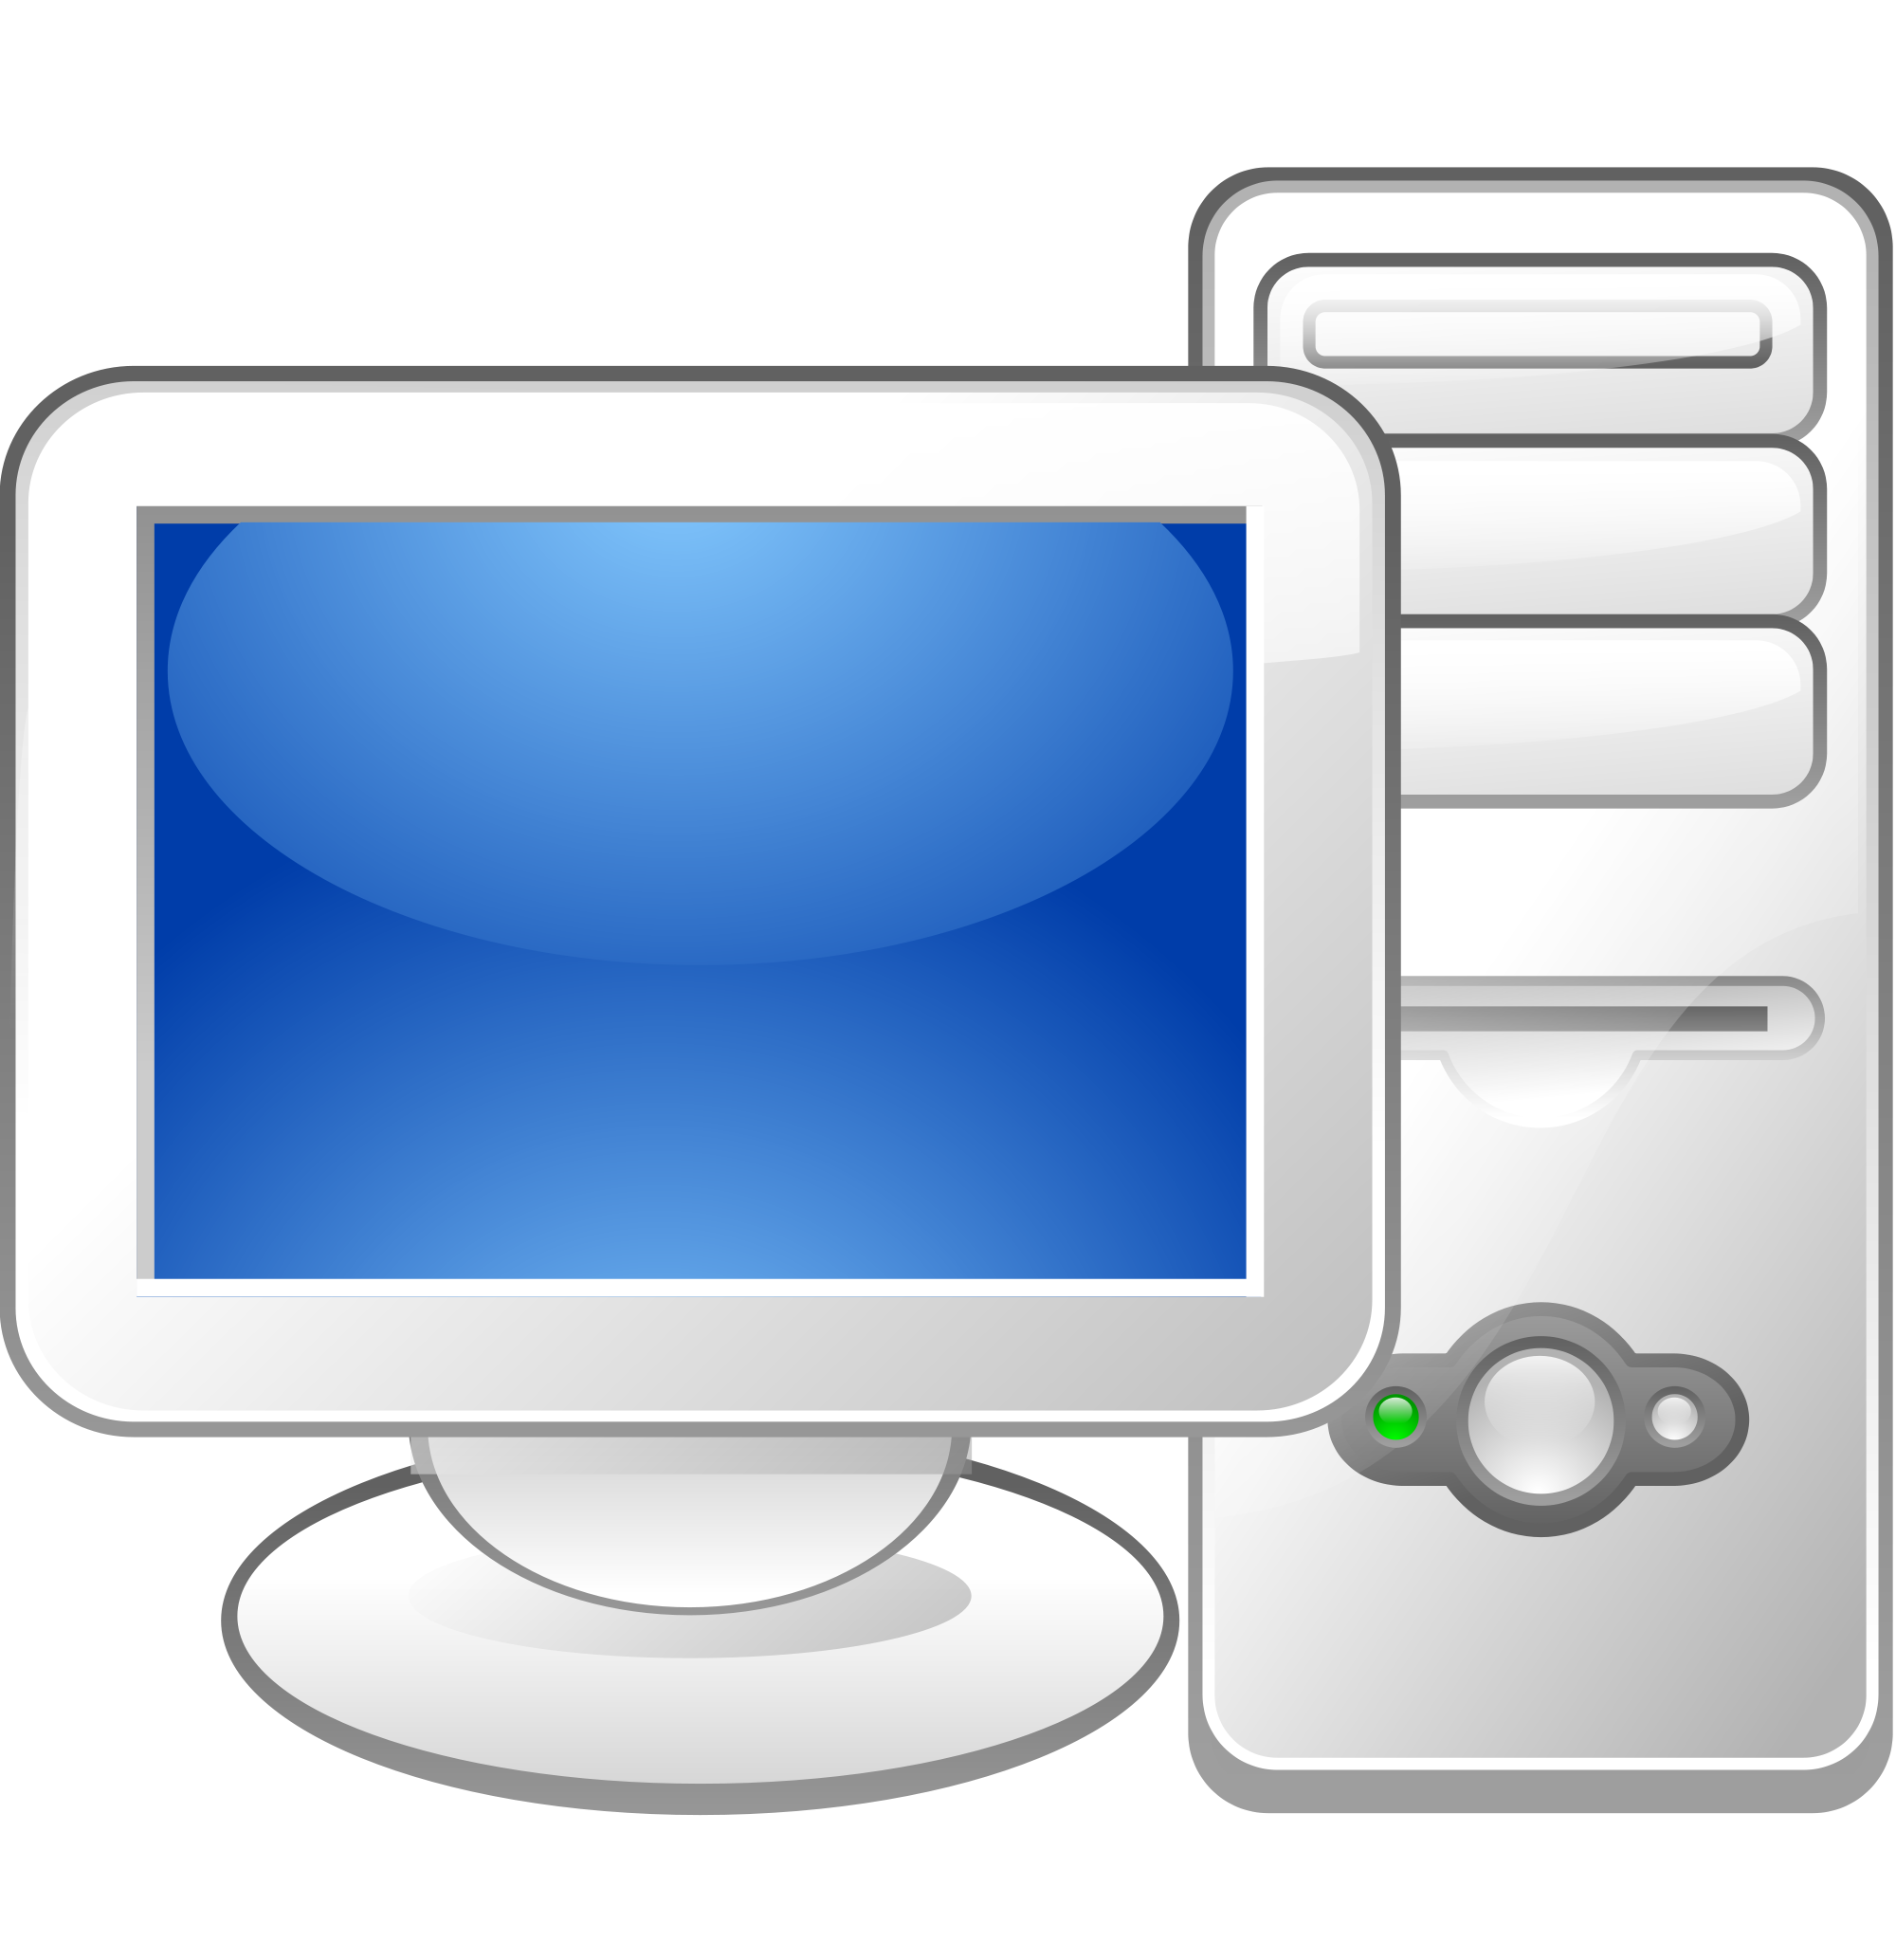 File:Computer n screen.svg - Wikimedia Commons